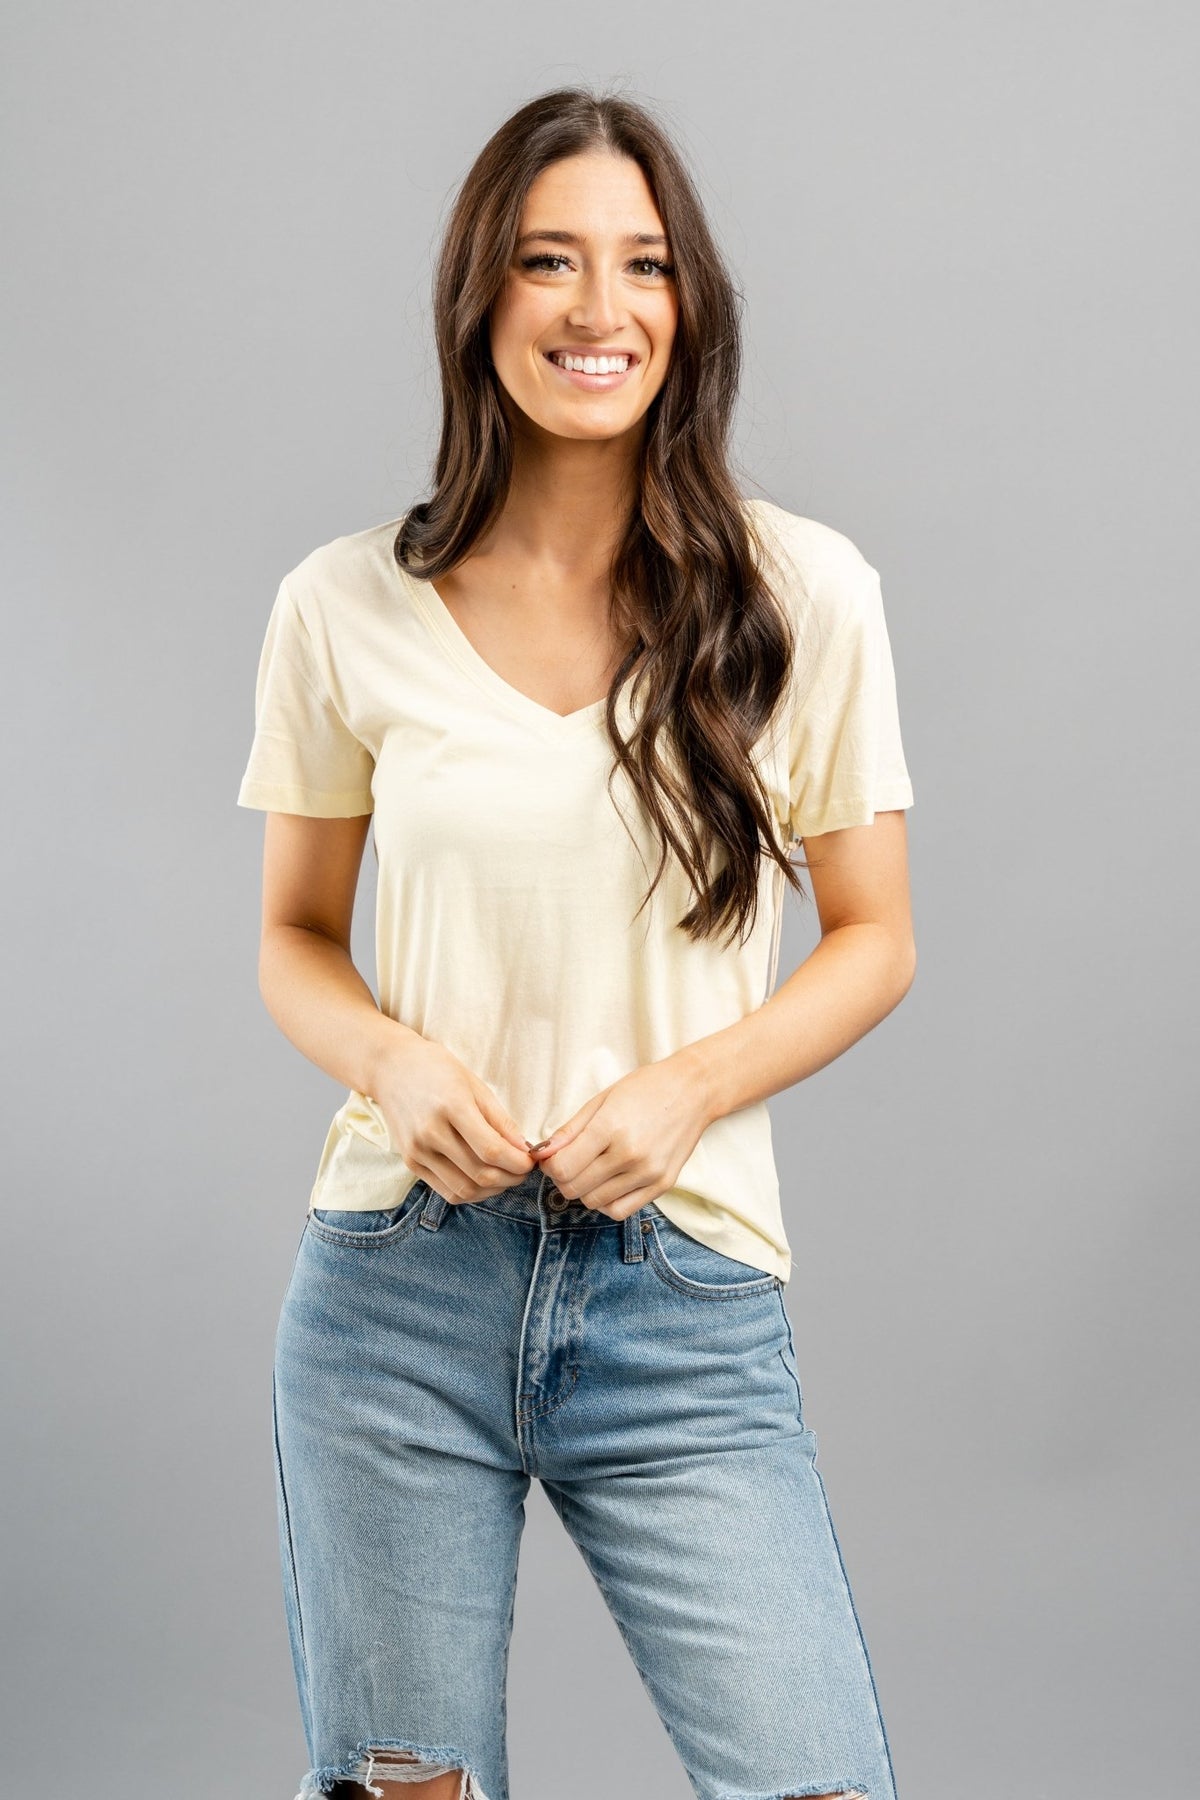 Z Supply Kasey modal v-neck top sunrise - Z Supply Top - Z Supply Tops, Dresses, Tanks, Tees, Cardigans, Joggers and Loungewear at Lush Fashion Lounge